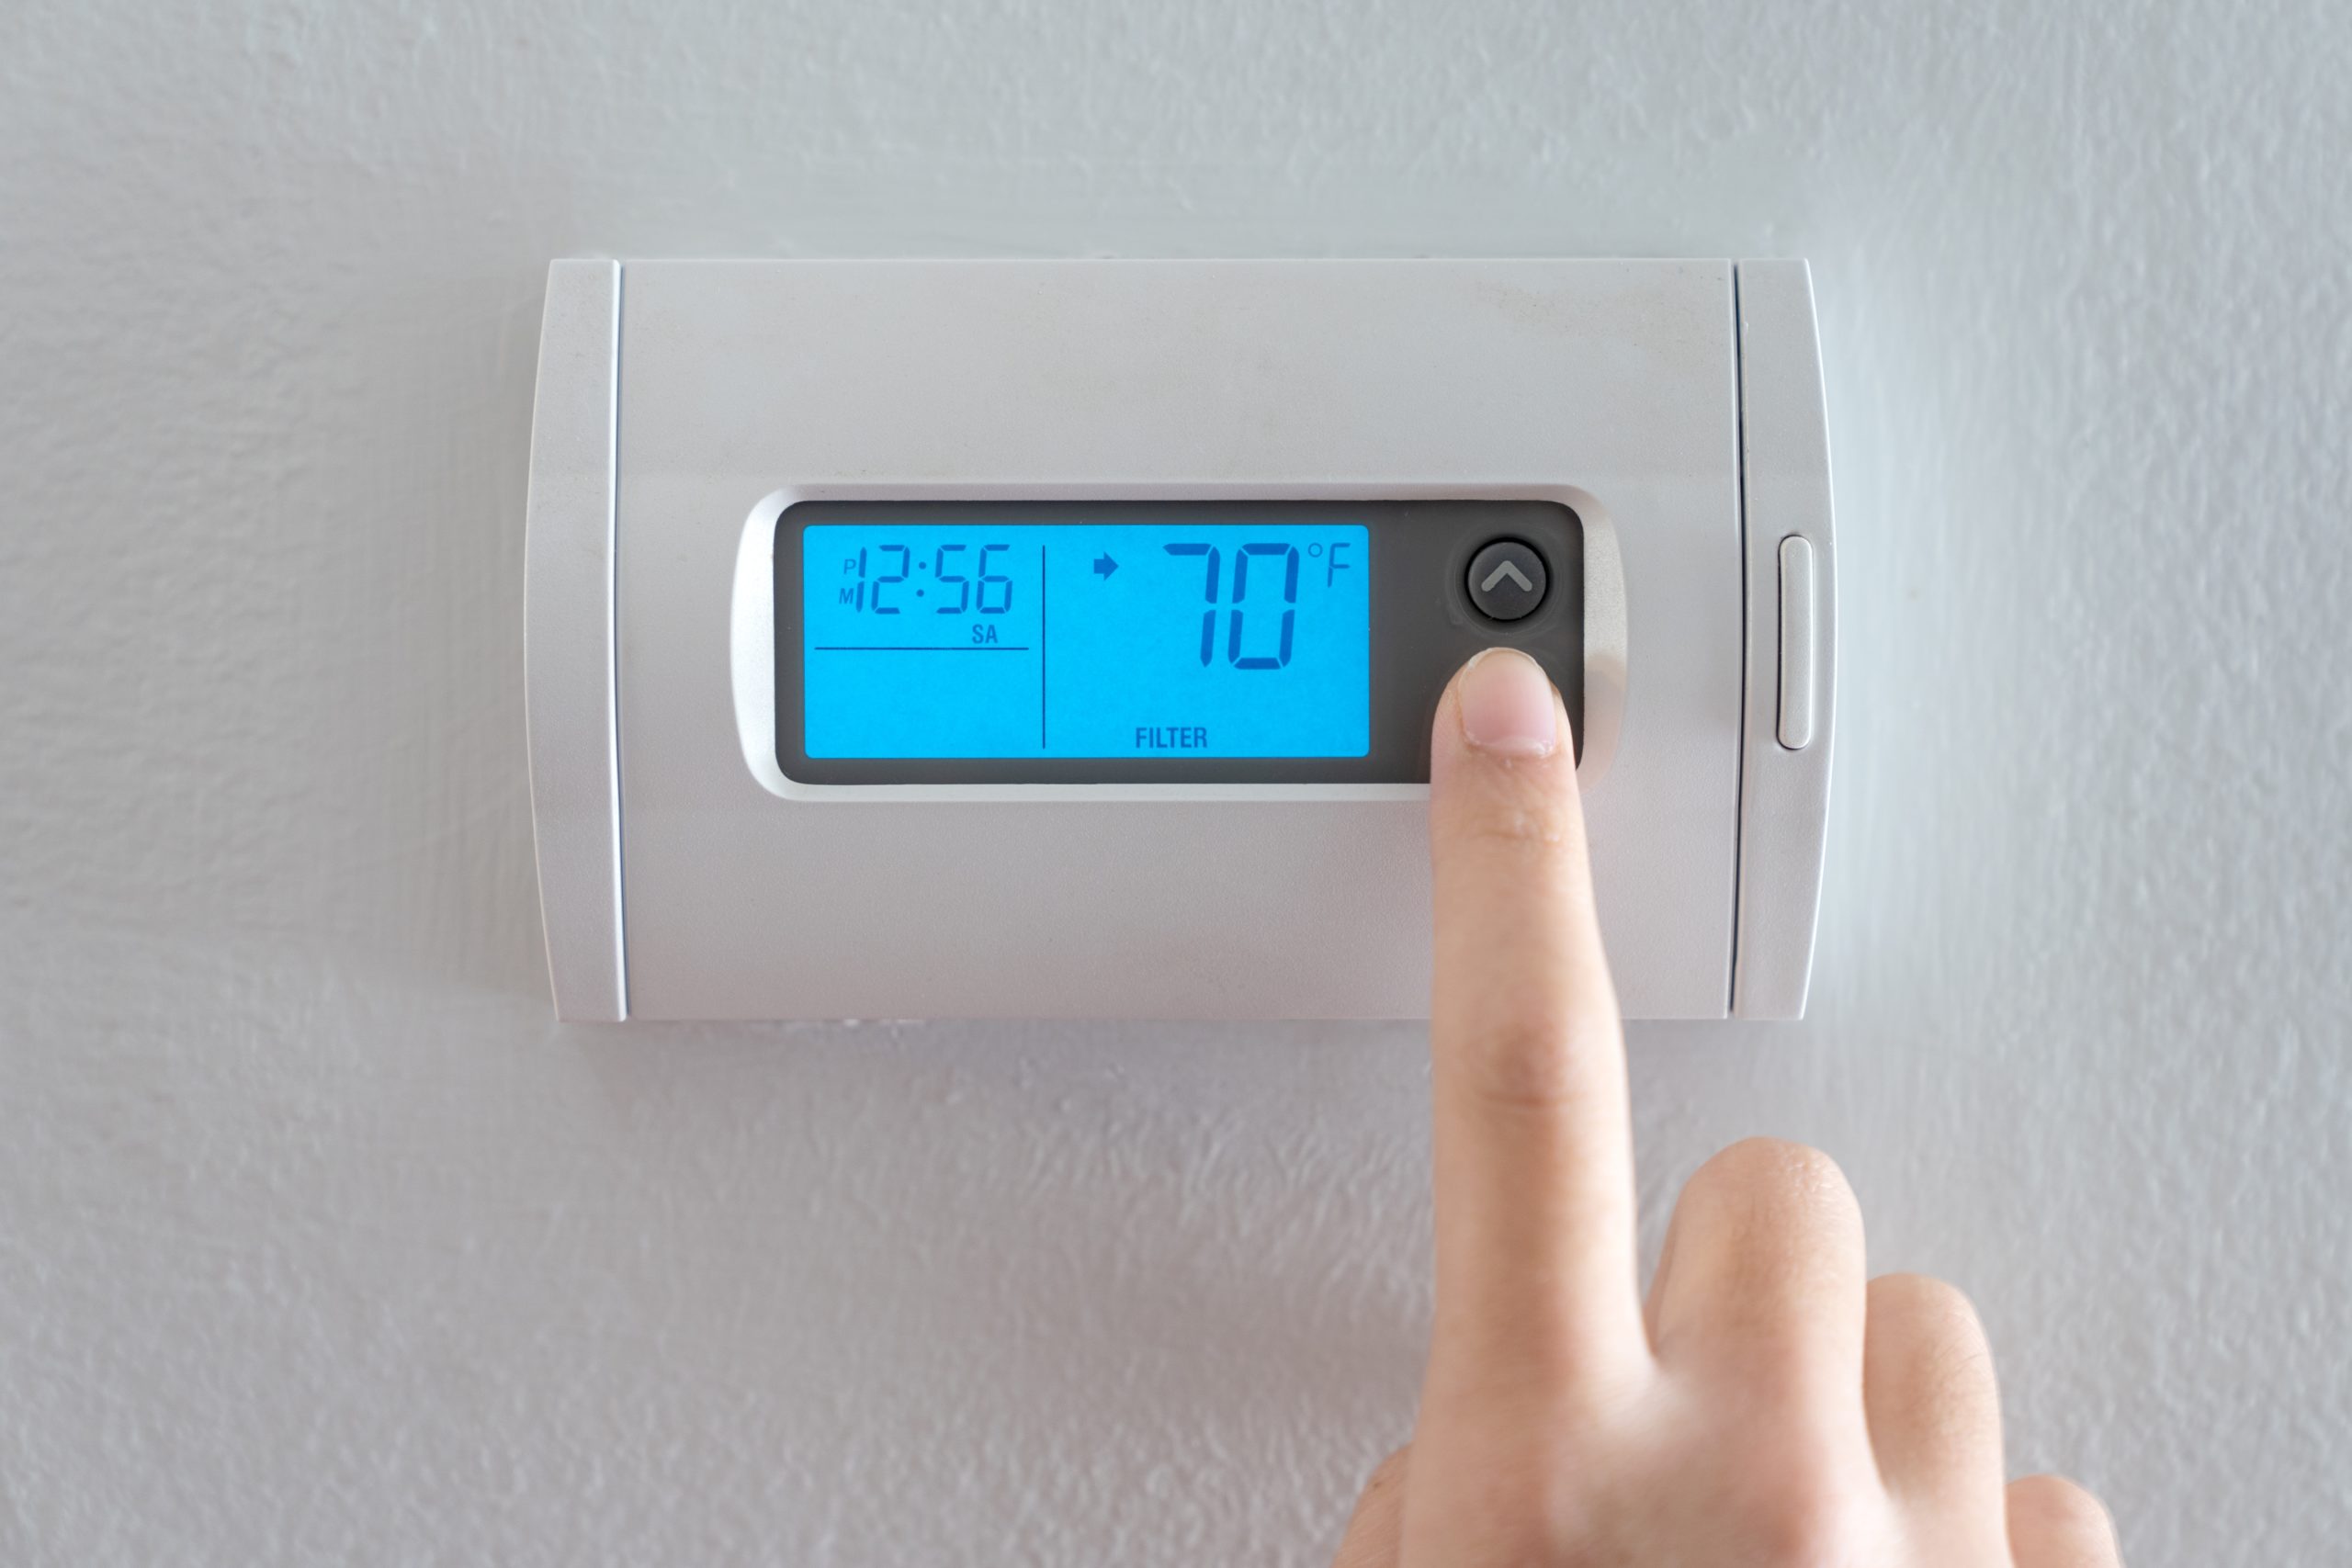 Texas Energy Companies Can Remotely Control Your Thermostat